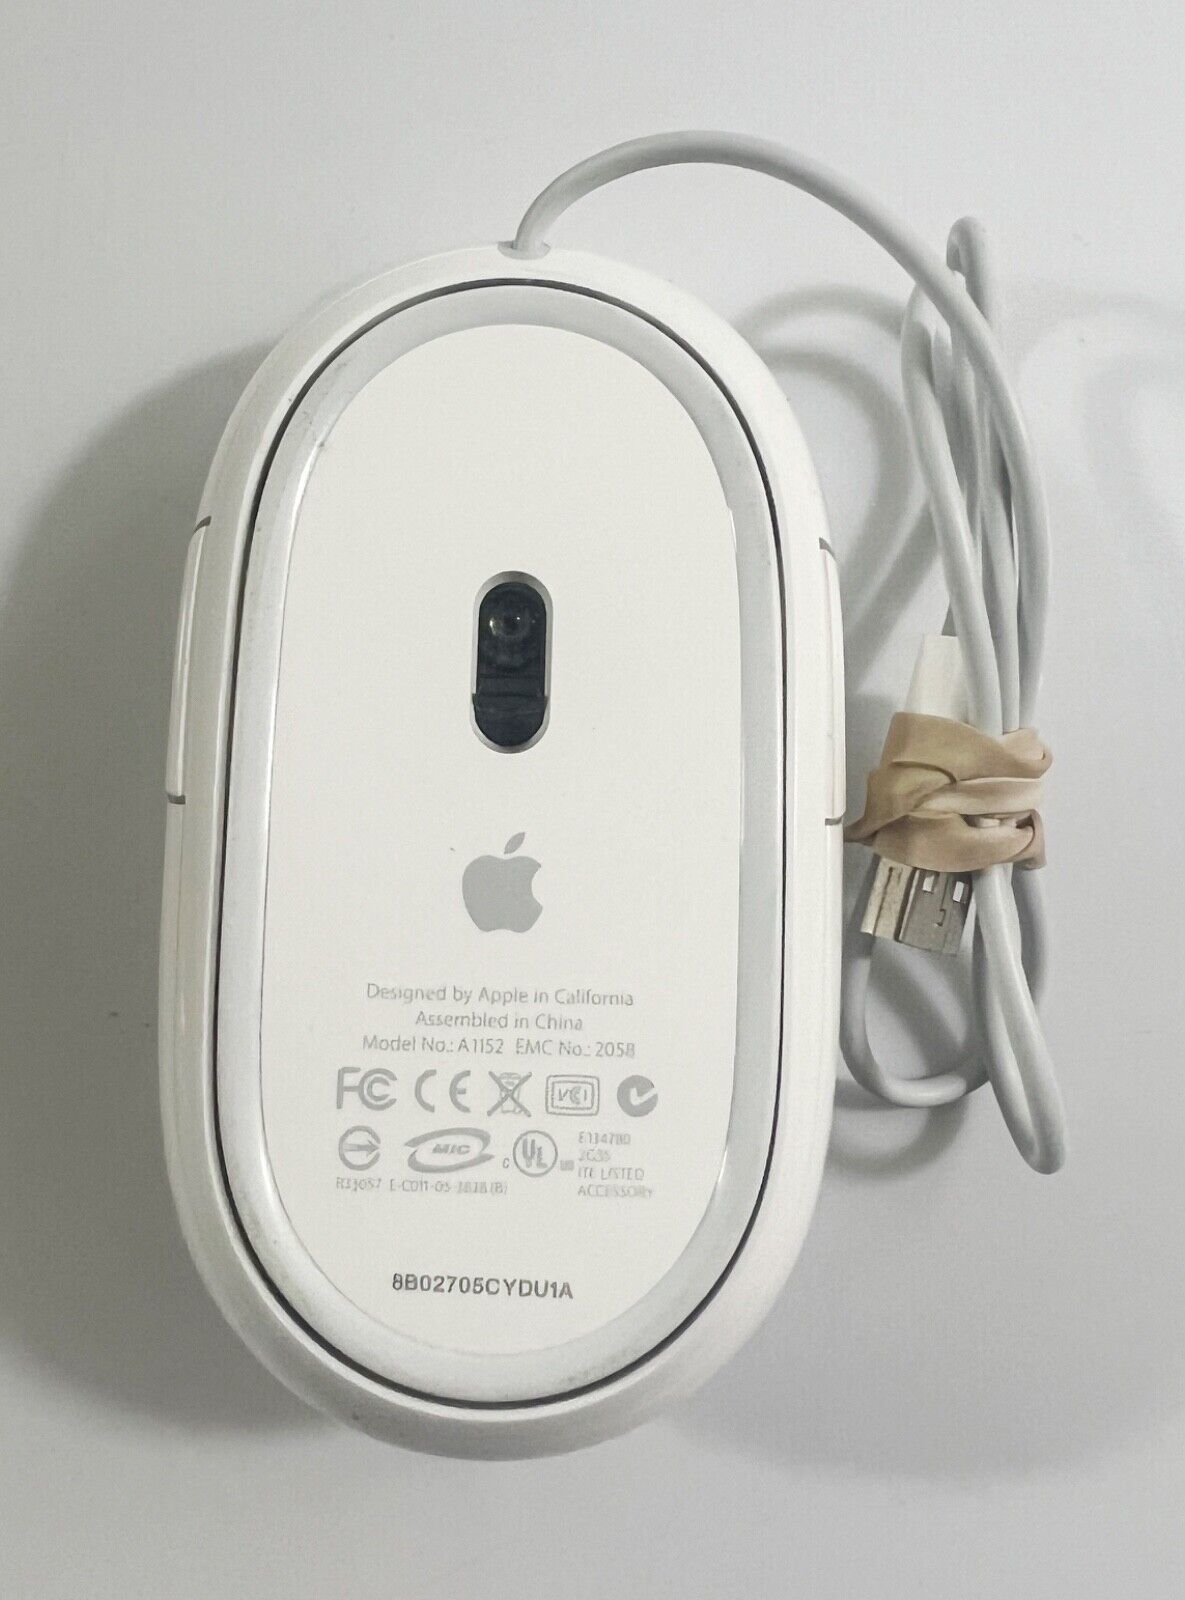 Genuine Apple Wired Mouse A1152 2058 USB Optical Mouse For IMAC Macbook - $7.84